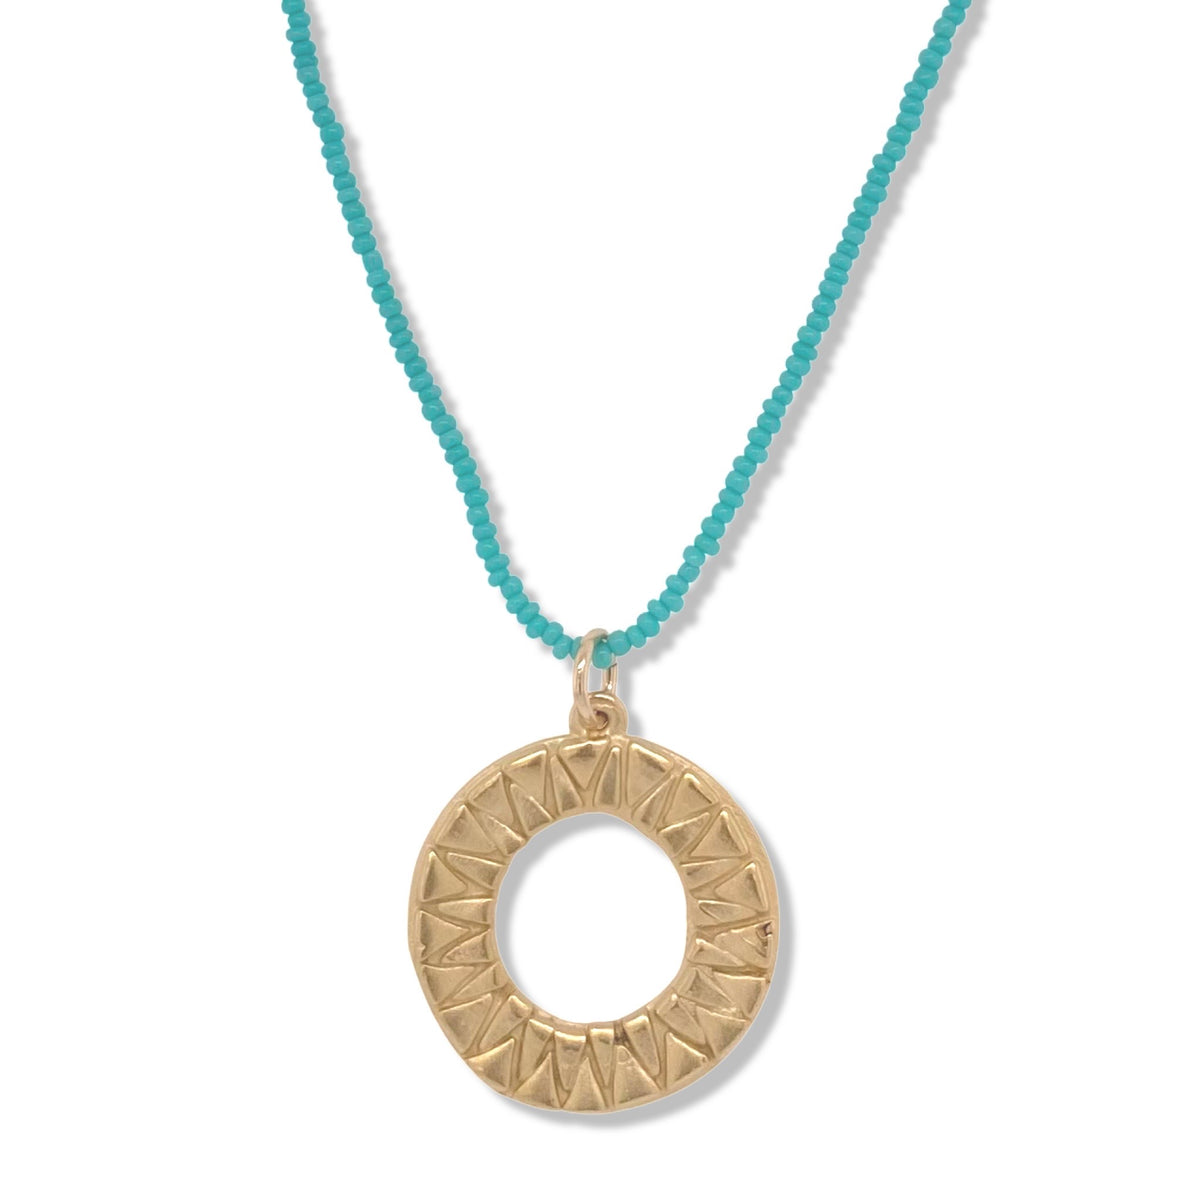 TRIBAL LOOP NECKLACE IN TURQUOISE BY KEELY SMITH JEWELRY | NANTUCKET